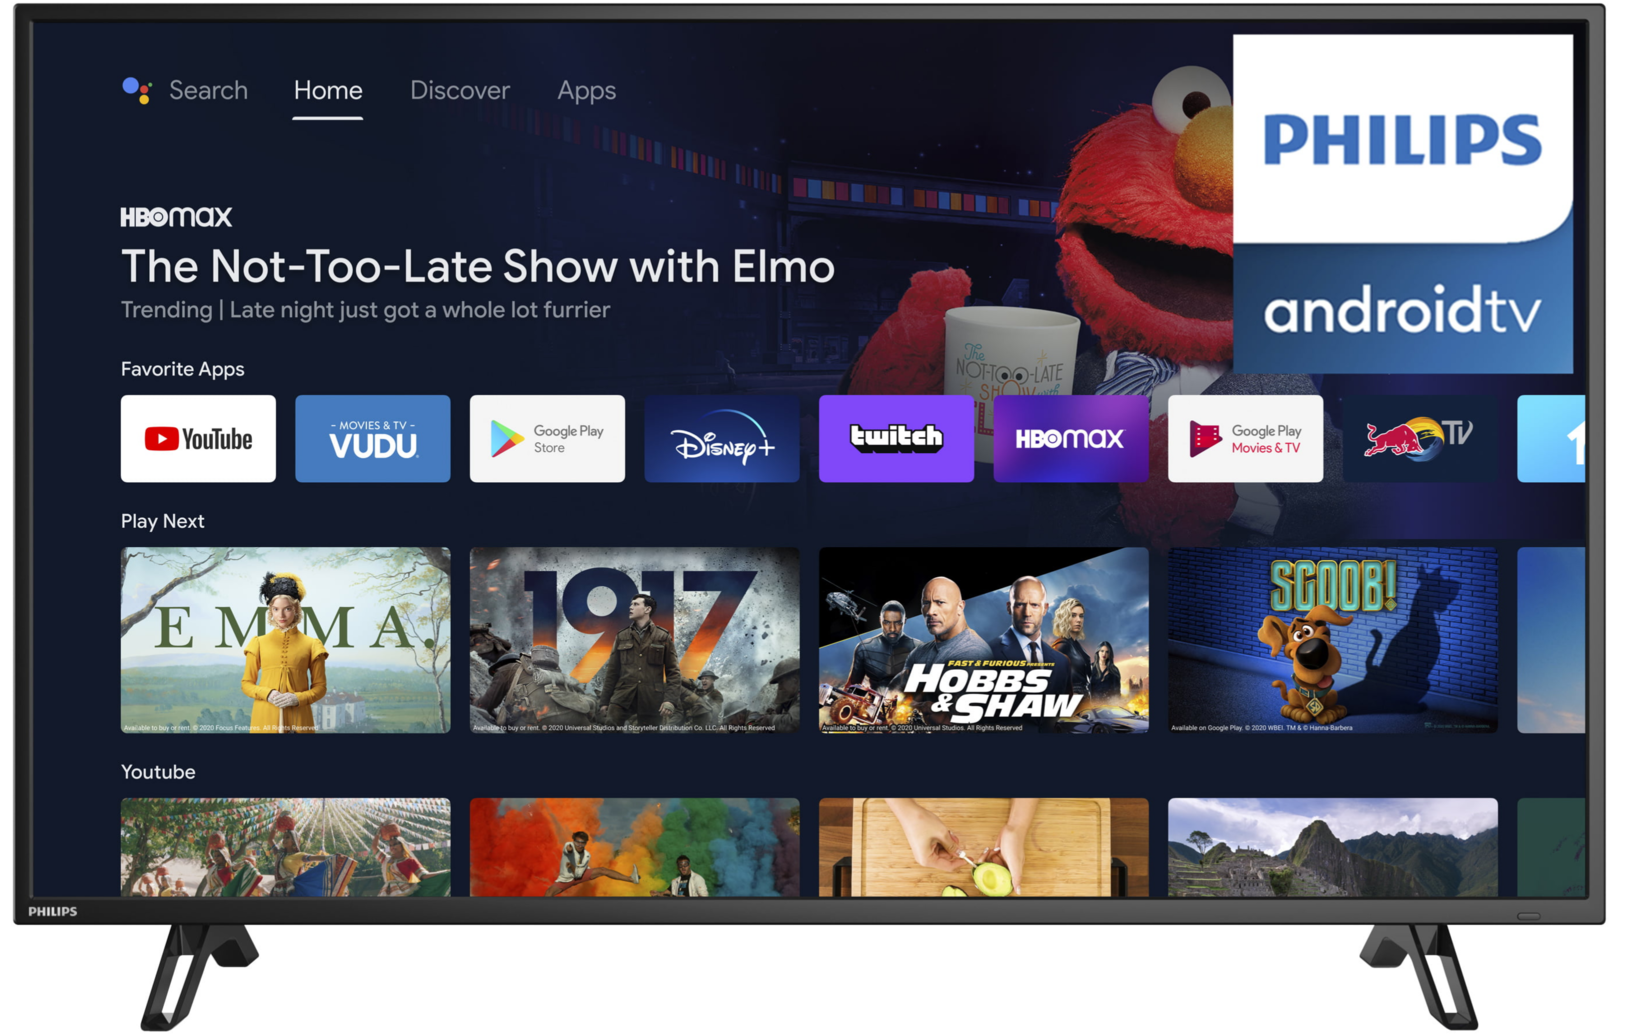 Philips 43" Class 4K Ultra HD (2160p) Android Smart LED TV with Google Assistant (43PFL5766/F7) - Walmart.com $169 YMMV